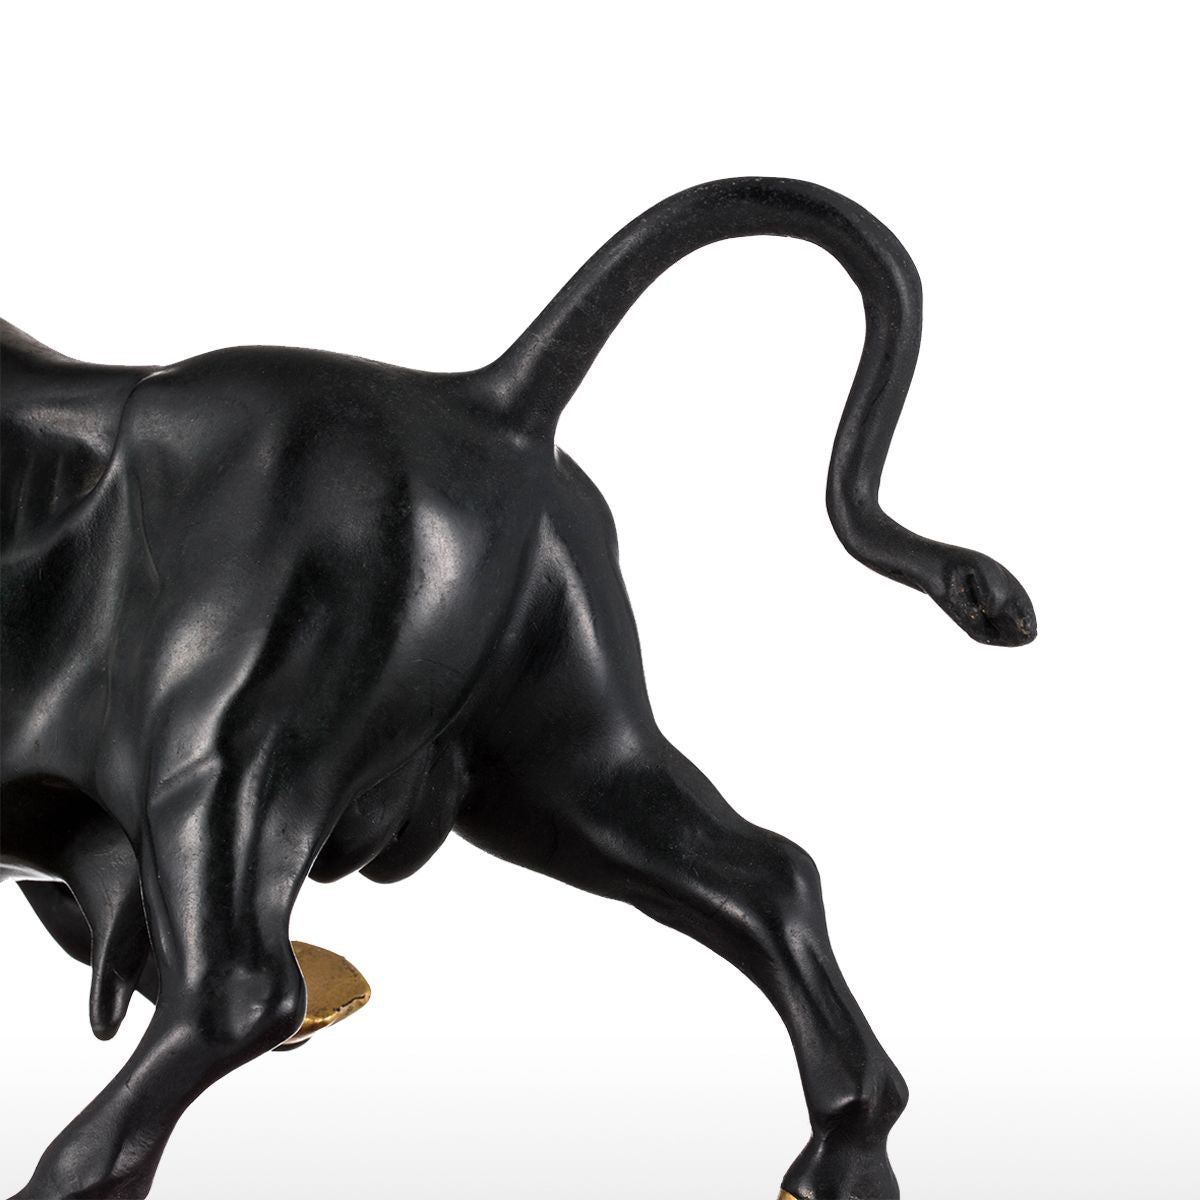 Rampant Crazy Cattle and Bull Sculpture for Interior Decorative Object, , Art Decoration, Interior Decoration, Sculpture, Glass Art, 